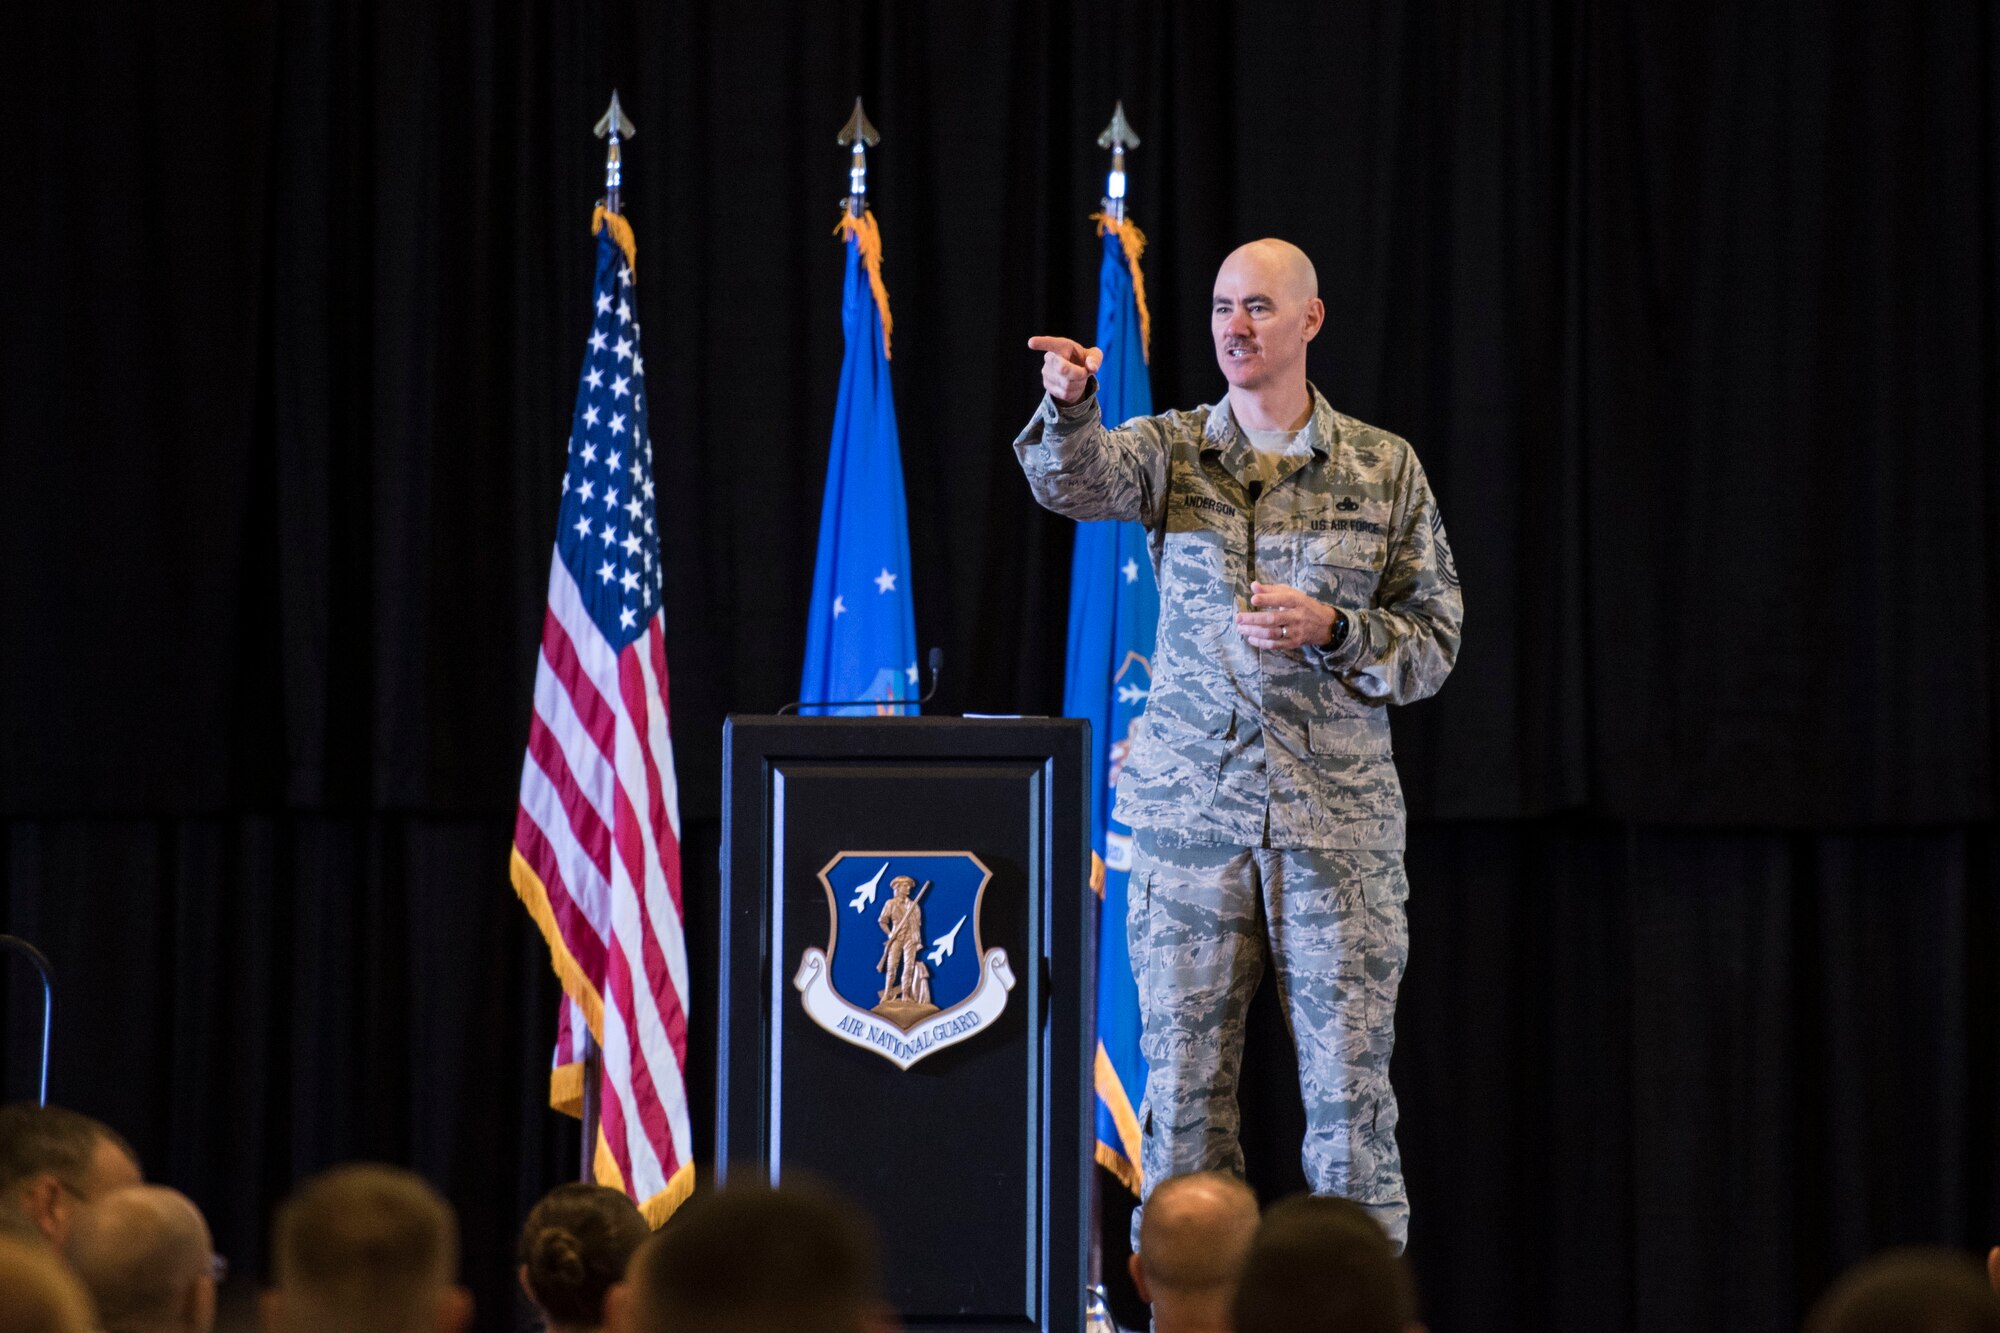 Command Chief of the Air National Guard, Chief Master Ronald Anderson welcomes Airmen to the Enlisted Leadership Symposium at Camp Dawson, W.Va., Aug. 15-17. Nearly 350 Airmen representing Air National Guard units from each state, territory and the District of Columbia, attended the event, hosted by the Command Chief of the Air National Guard, Chief Master Ronald Anderson. The three-day event focused on leadership and professional development. Airmen, non-commissioned officers and senior non-commissioned officers were hand-selected by their units to attend the event. (U.S. Air National Guard photo/Senior Master Sgt. Emily Beightol-Deyerle)